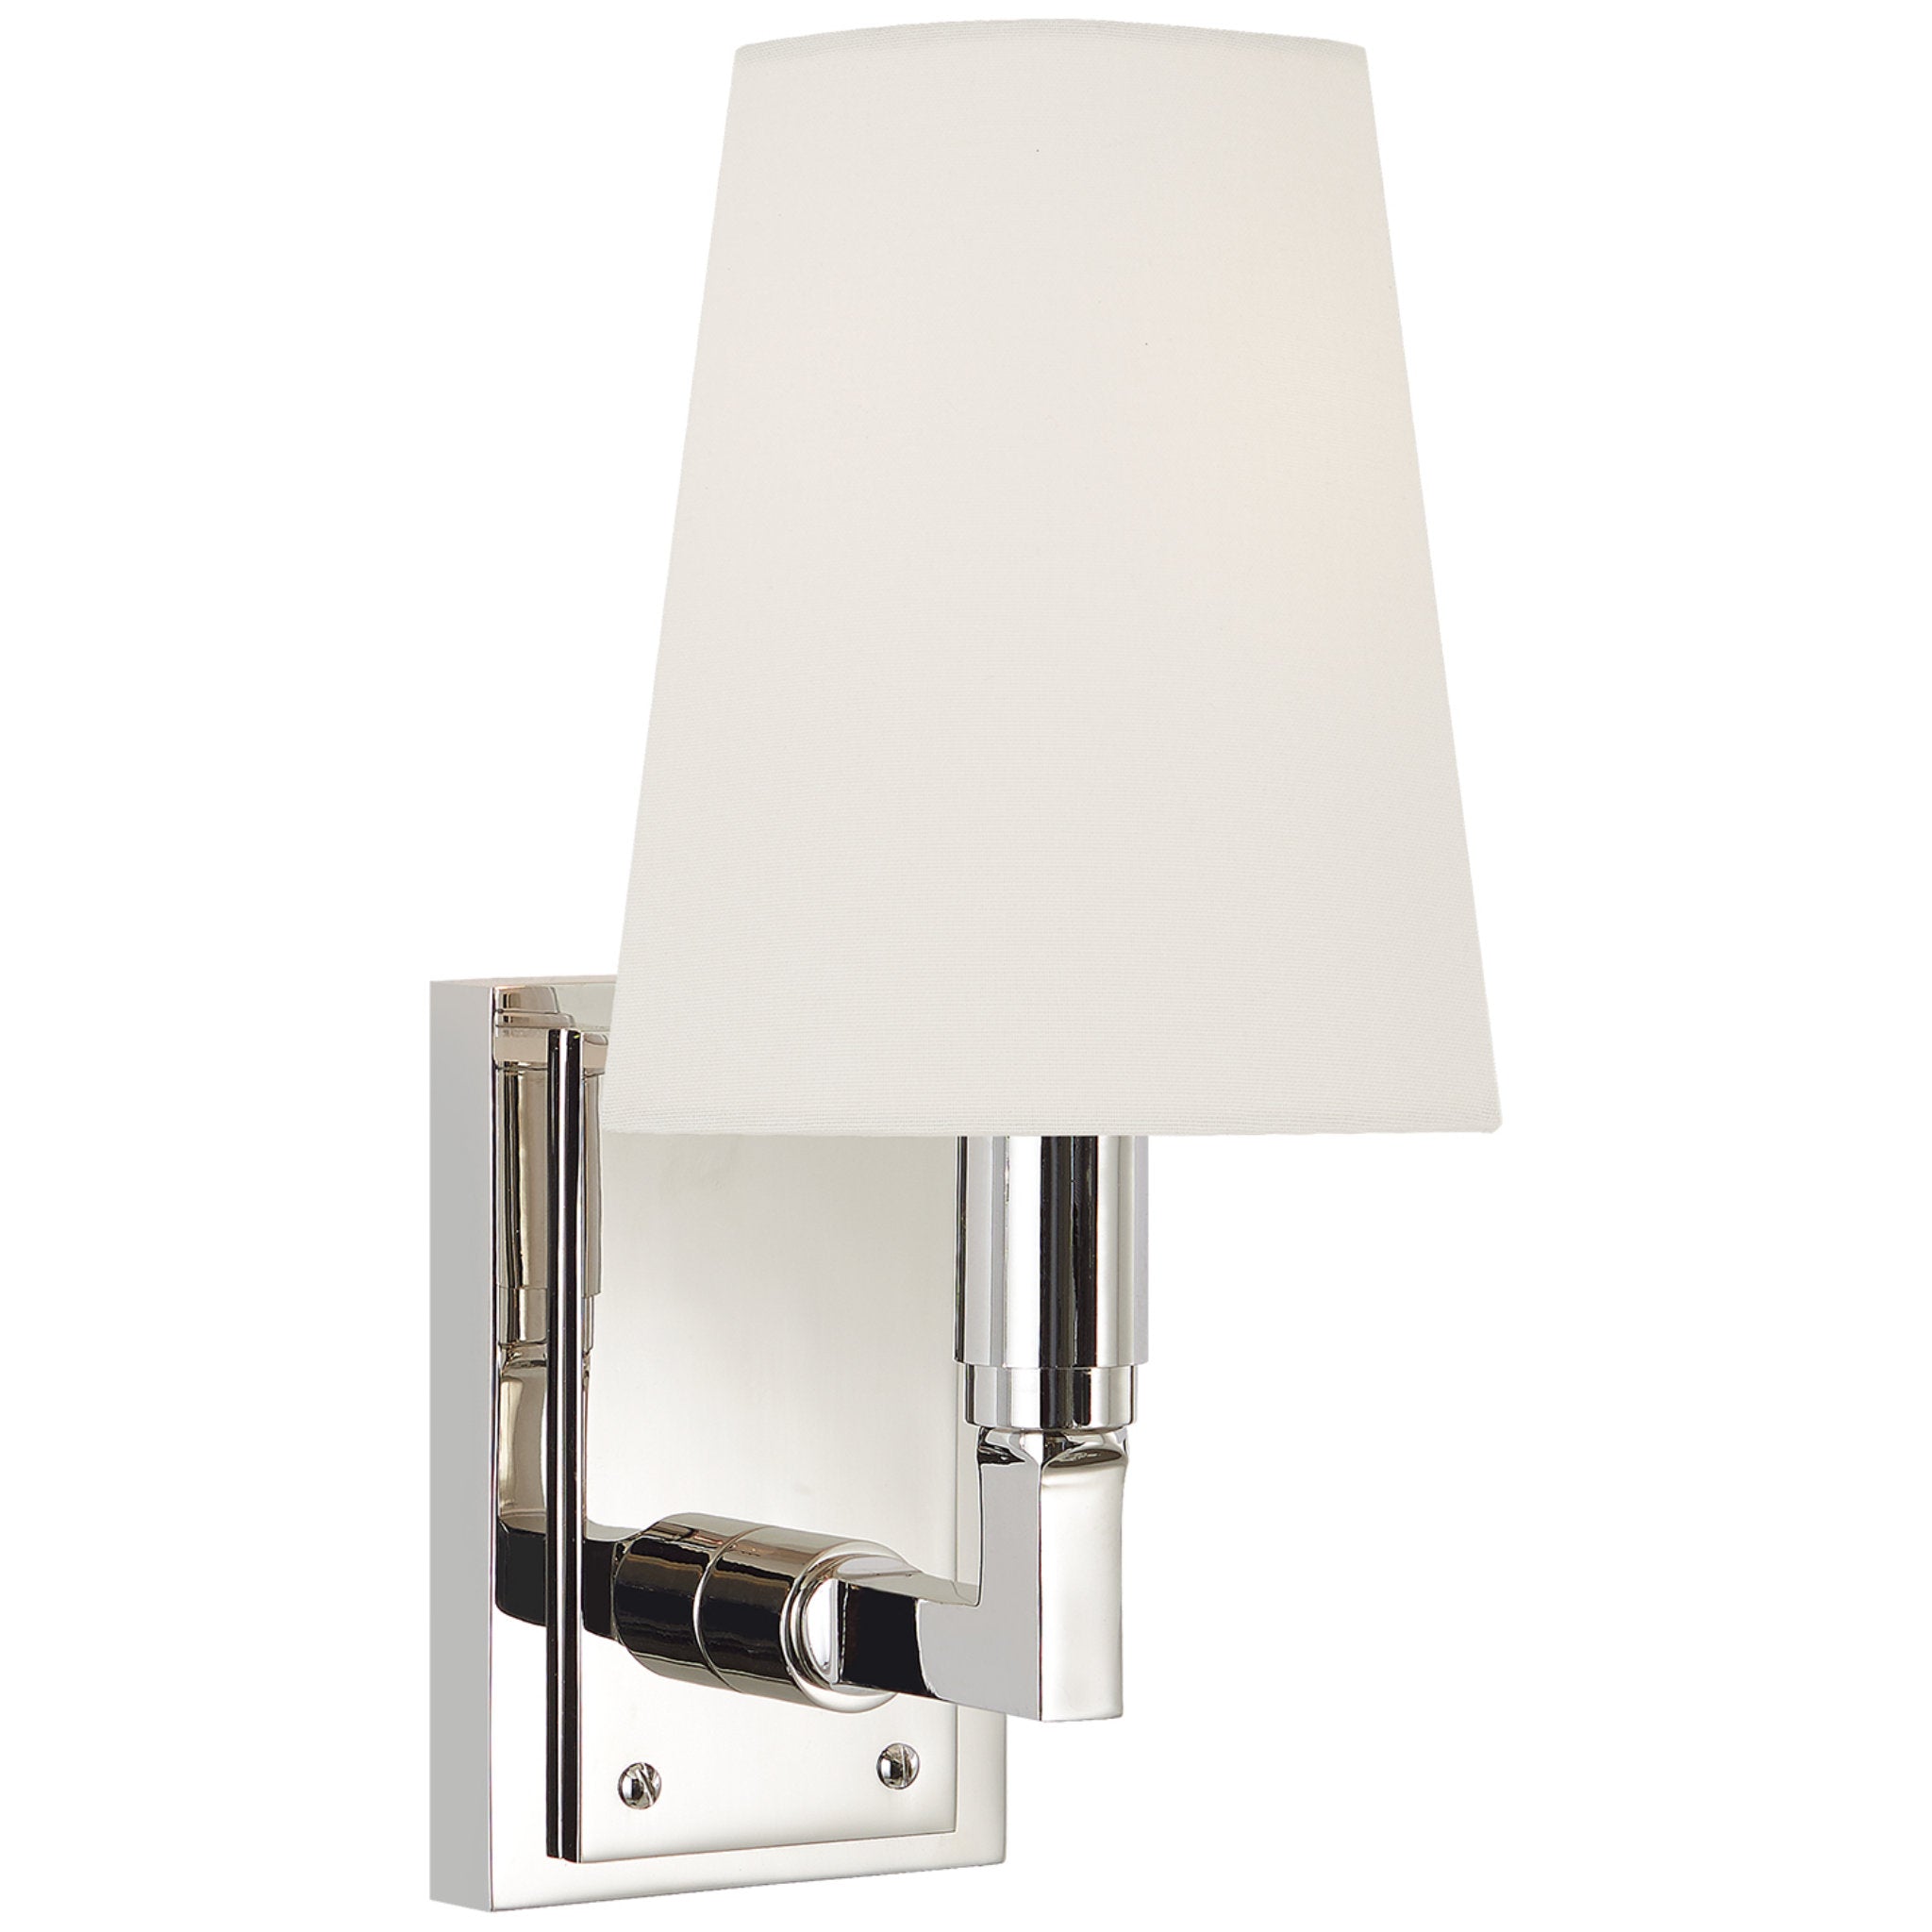 Thomas O'Brien Watson Small Sconce in Polished Nickel with Linen Shade